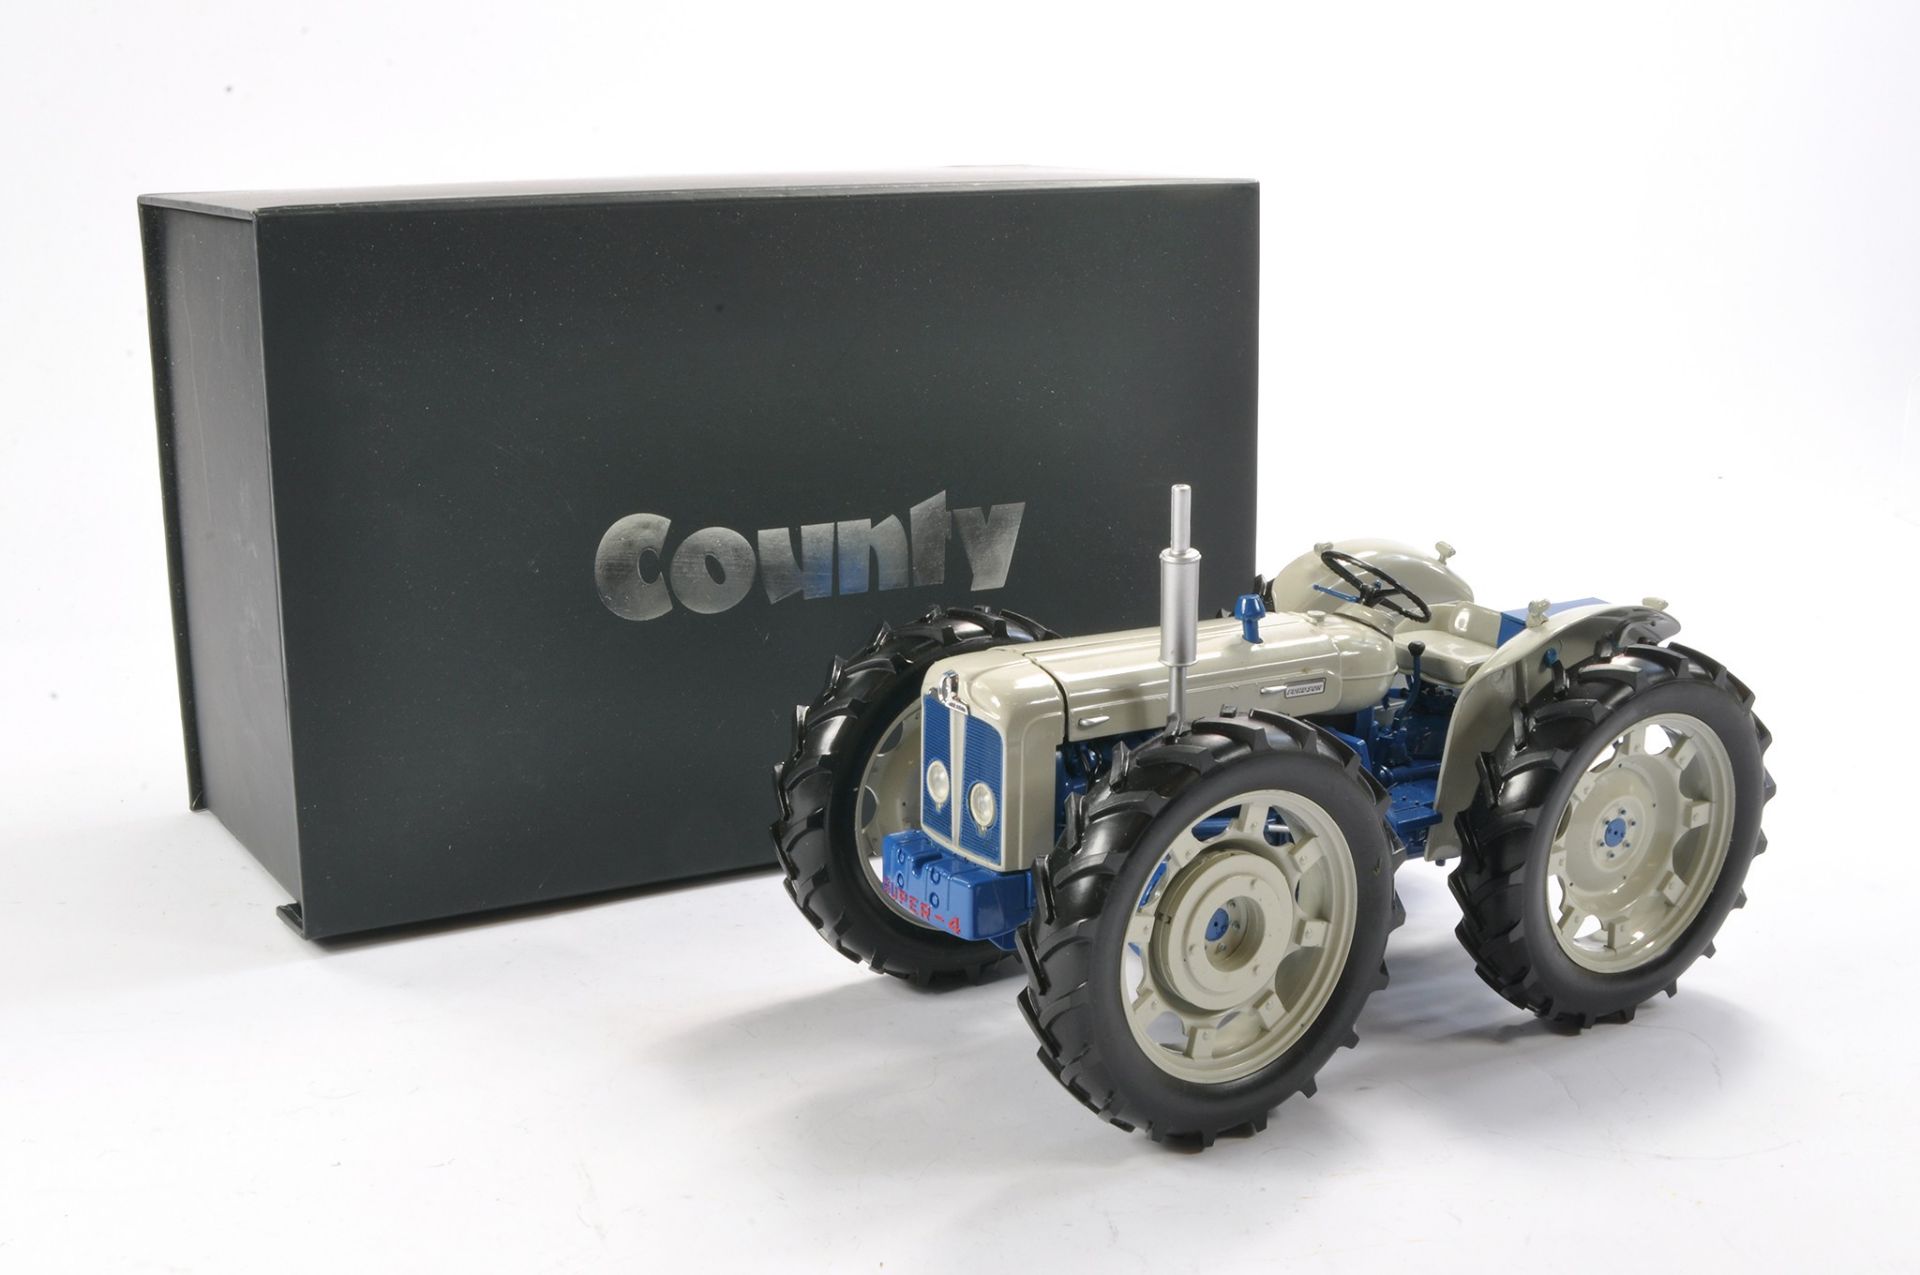 Universal Hobbies 1/16 County Super Four Tractor Special Edition. Looks to be complete without